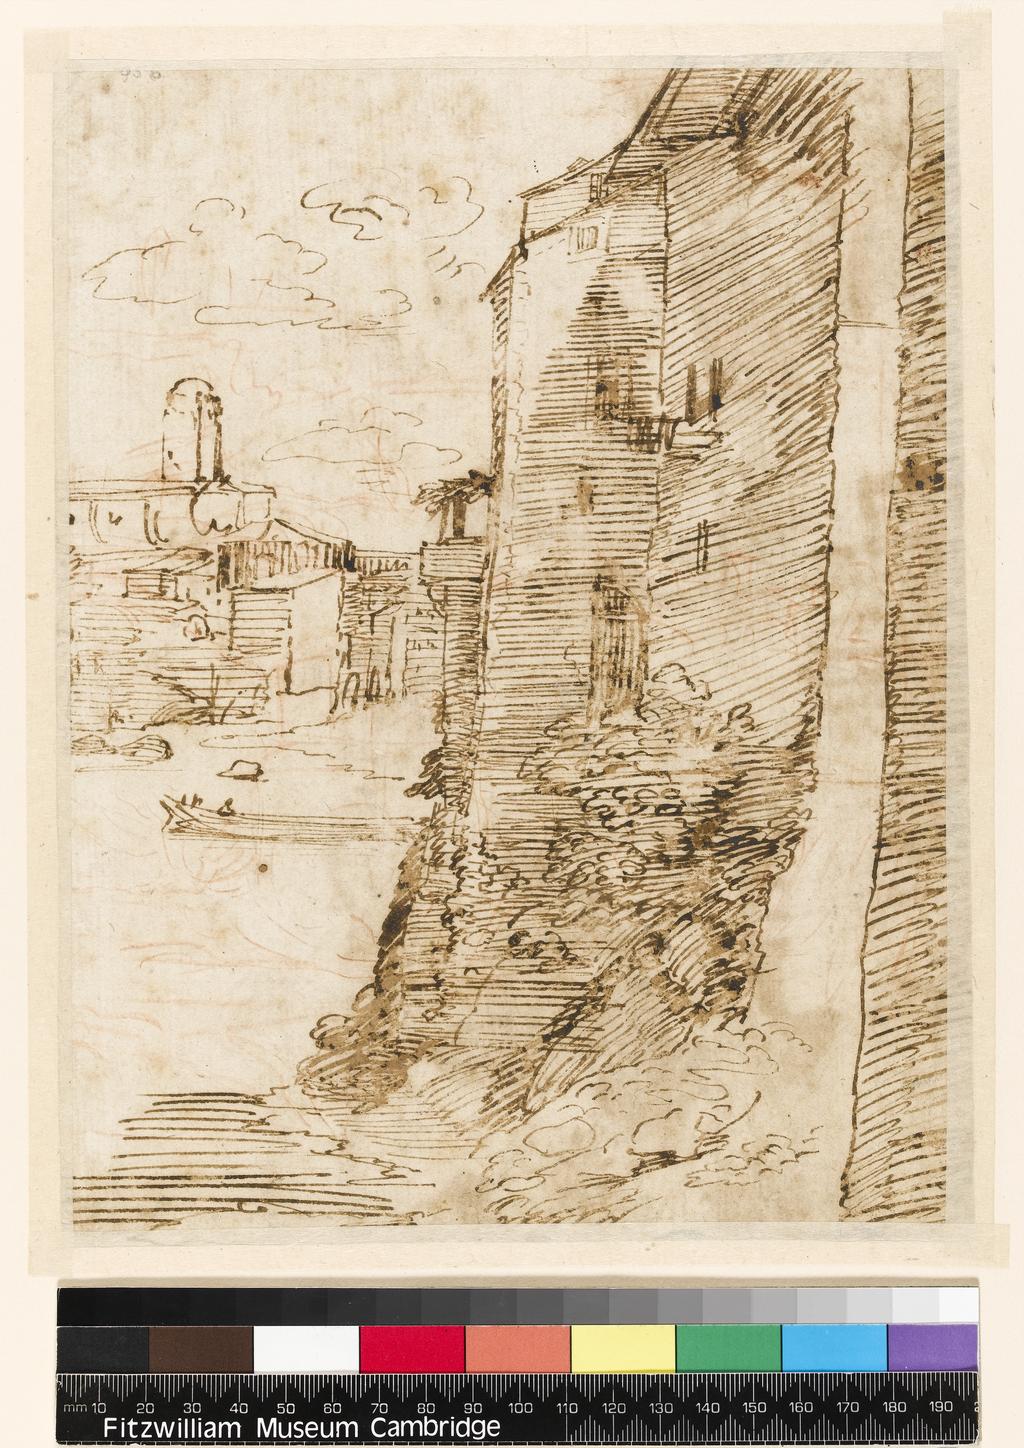 An image of Title/s:A view across the Tiber in Rome (recto title)  Maker/s: Peruzzi, Baldassare attributed to (draughtsman) [ULAN info: Italian artist, 1481-1536]Technique Description: pen and sepia (some traces of red chalk, verso), on paper Dimensions: height: 195 mm, width: 256 mm